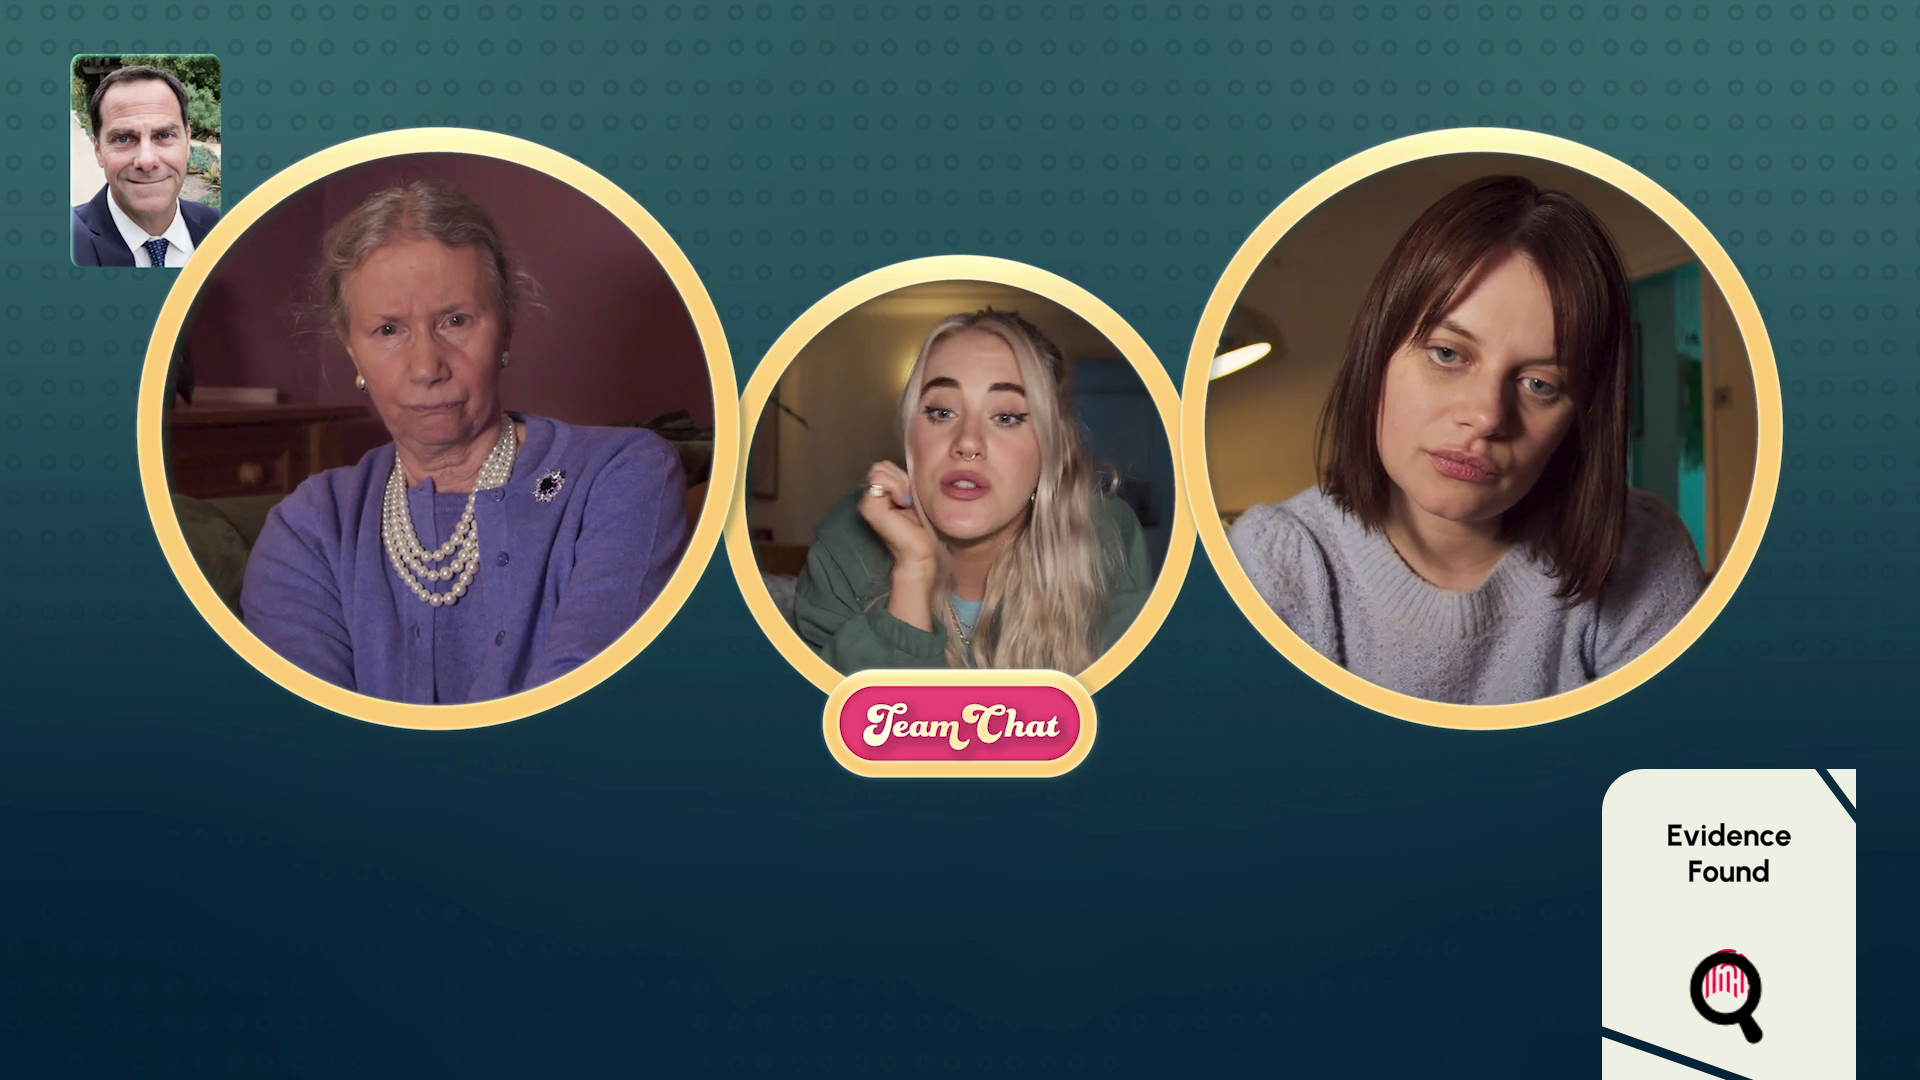 Three women gather on a video call. An elderly woman is on the left, a young blonde woman in the middle, and a young brunette on the right.